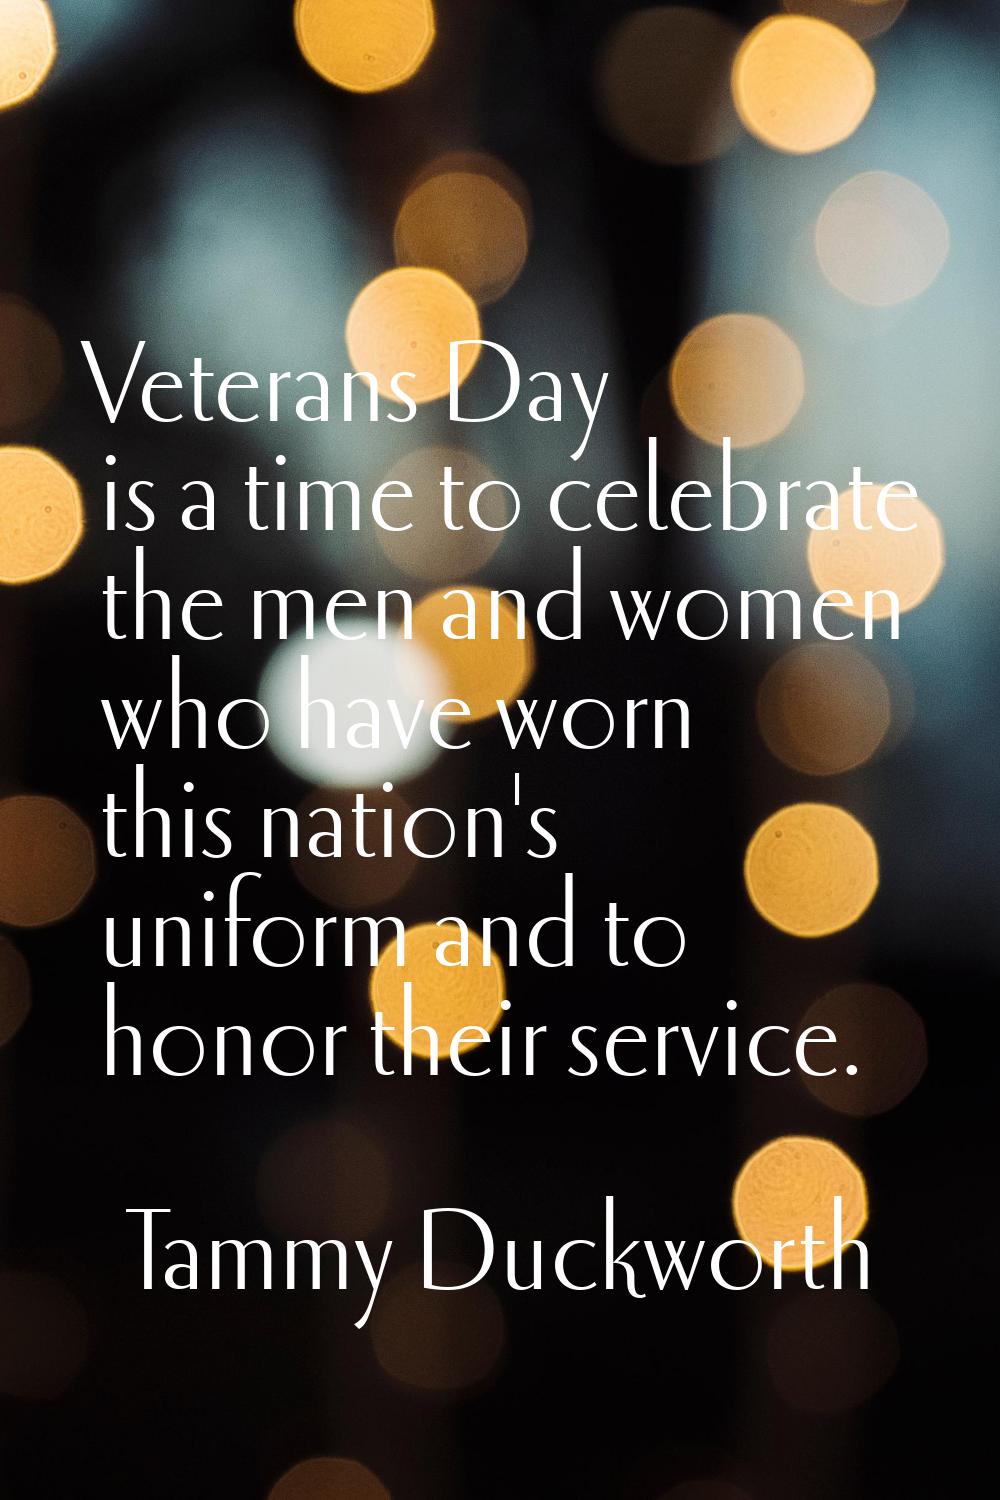 Veterans Day is a time to celebrate the men and women who have worn this nation's uniform and to ho